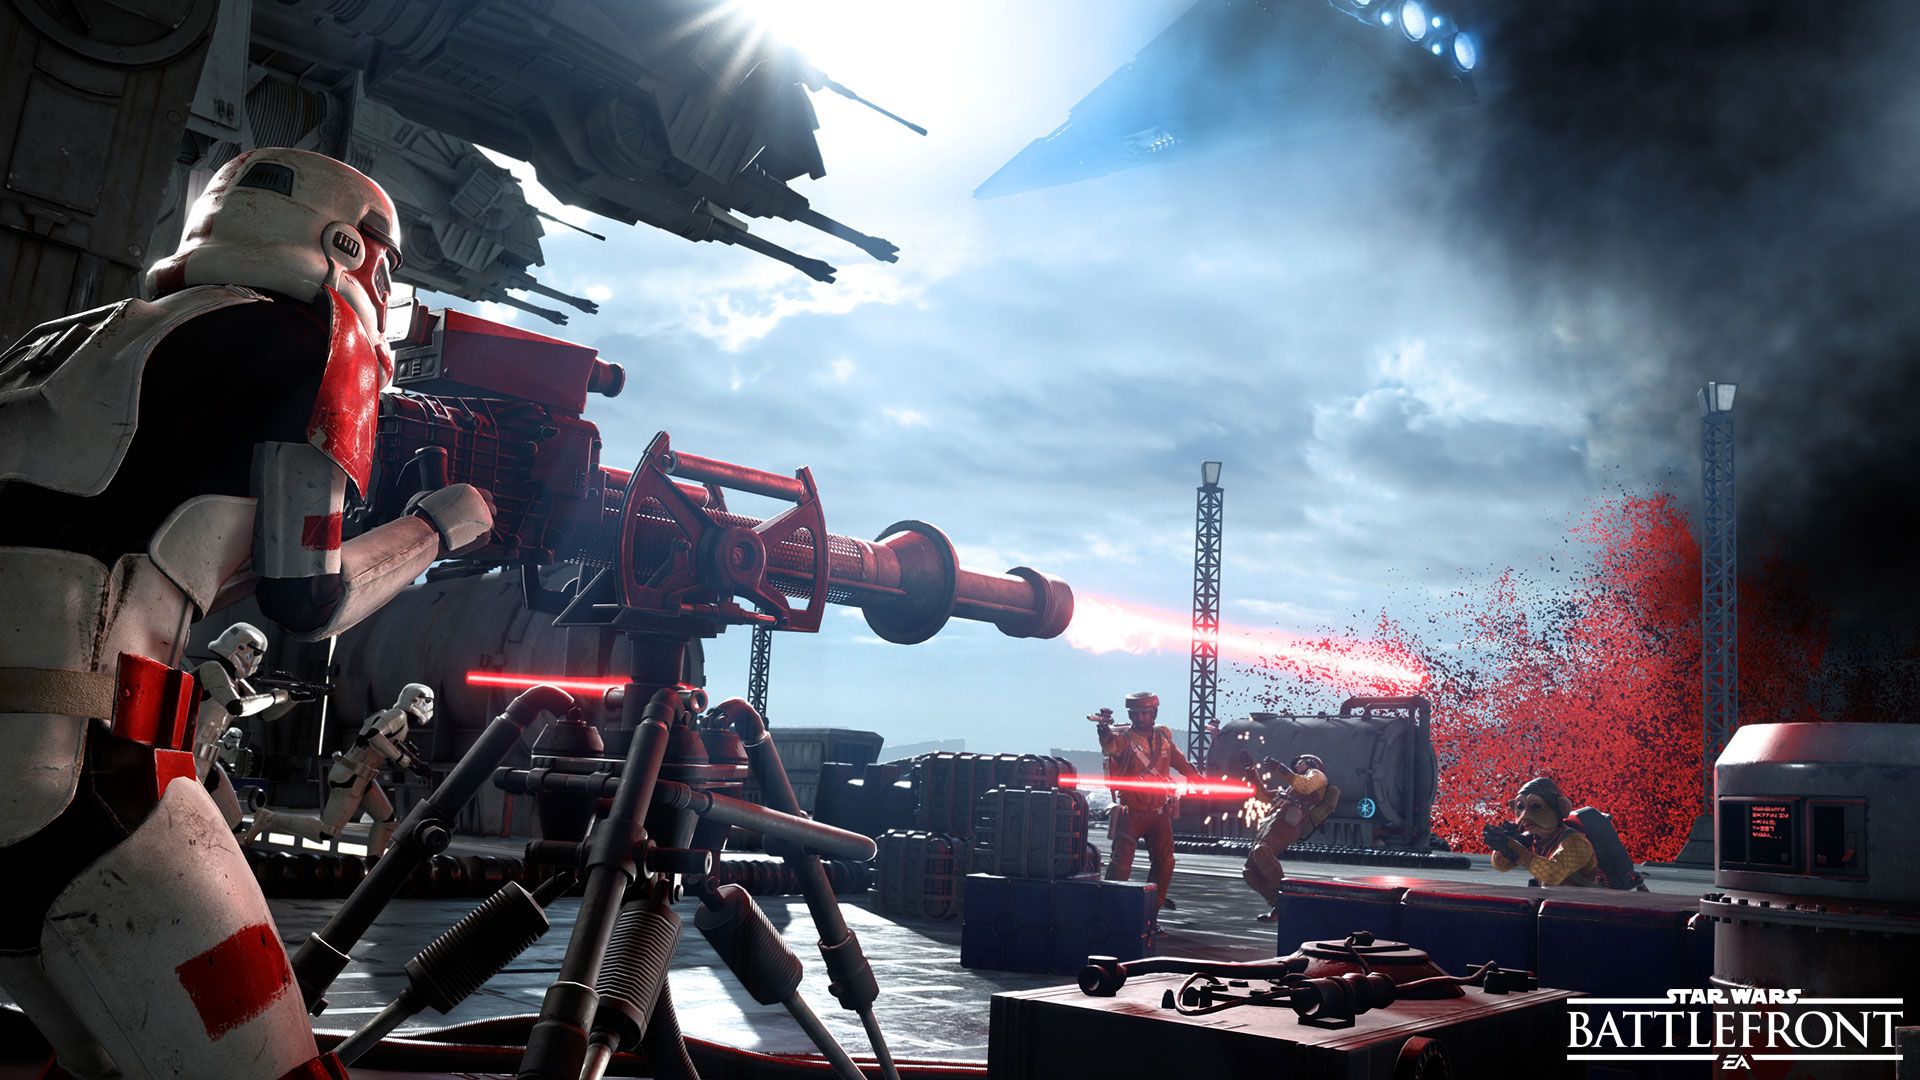 EA Play event will feature the new Star Wars Battlefront game